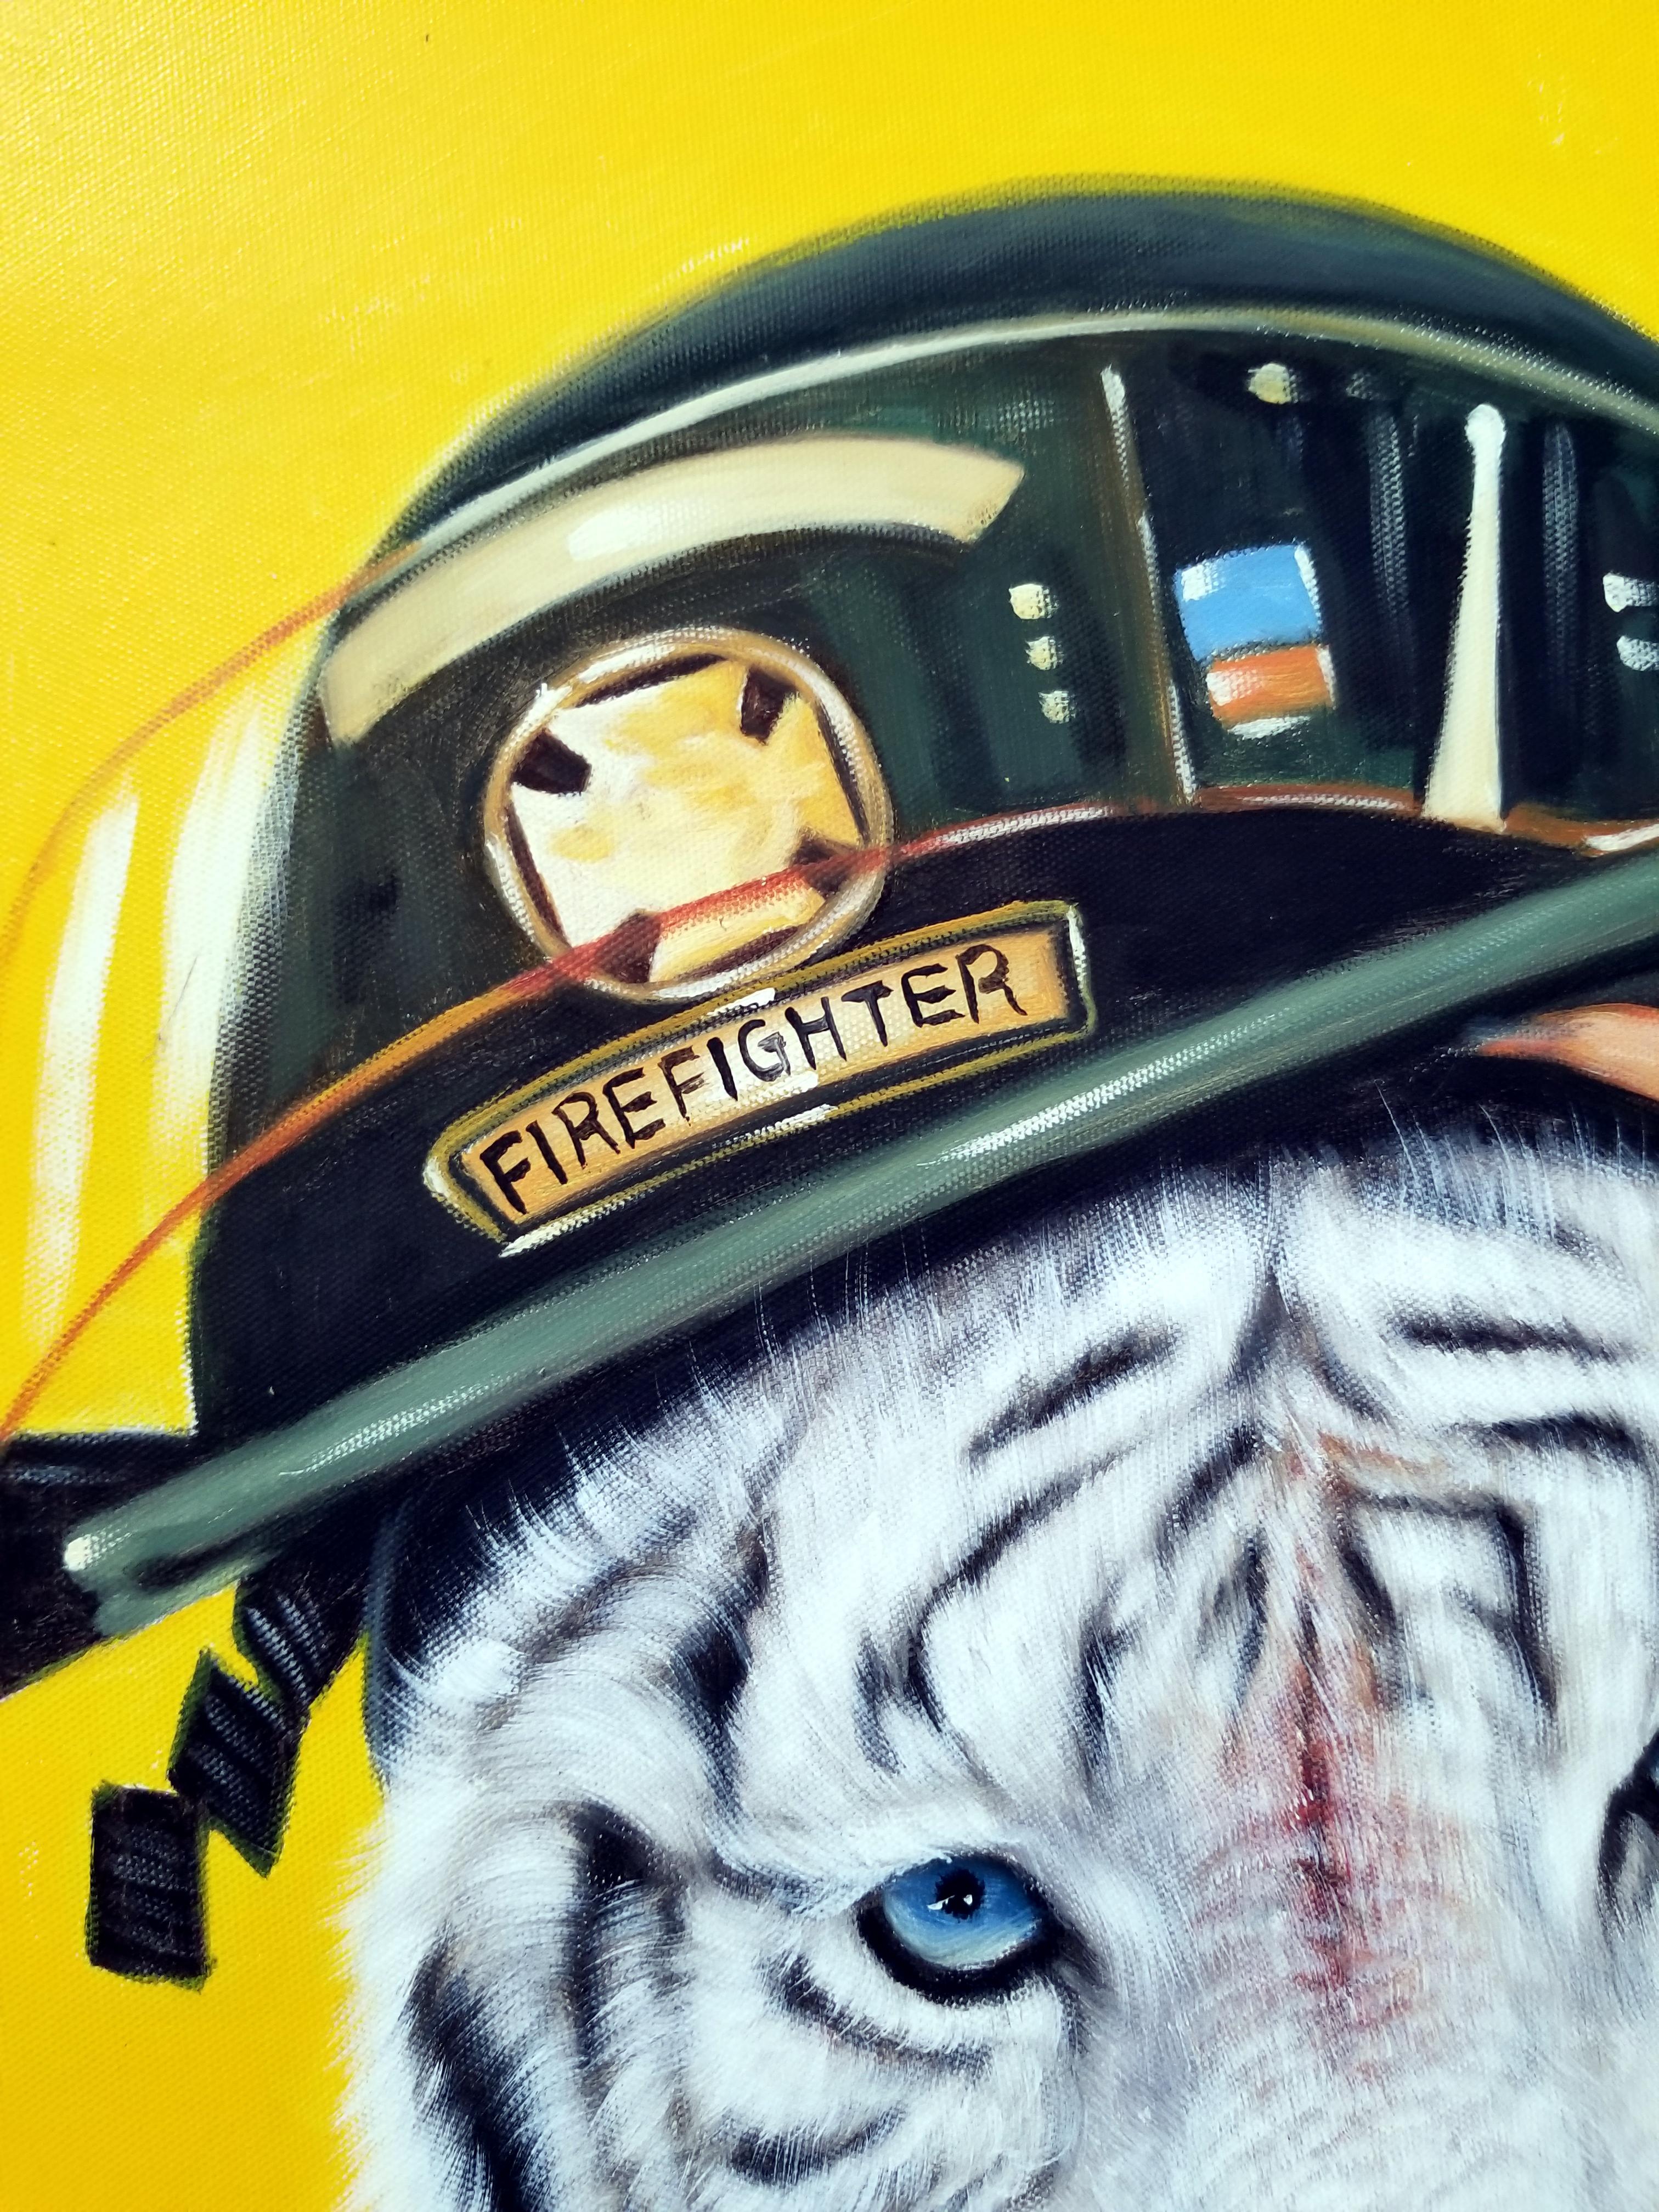 Tiger dressed as a fireman
Satire in Art
Original Paintings in series of 10 (inquire where it is in the edition)

Comes rolled in a tube ready to be framed

Y.m.Lo. resides in NYC